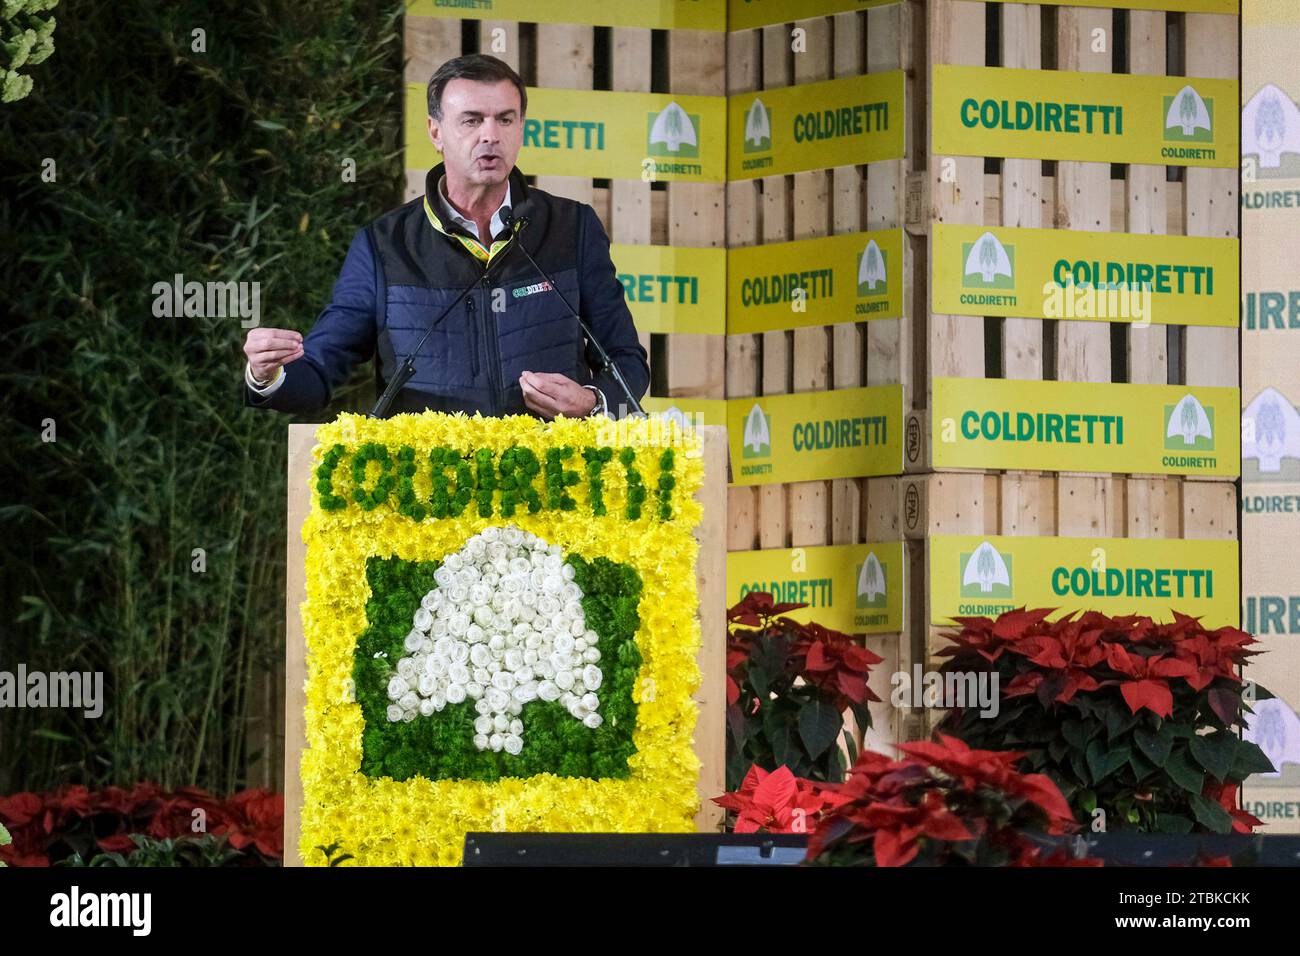 Ettore Prandini is Coldiretti's national president, spoke in Naples at the Coldiretti Village with more than 200 stands, including 100 with typical products of the land and other Italian specialties Stock Photo